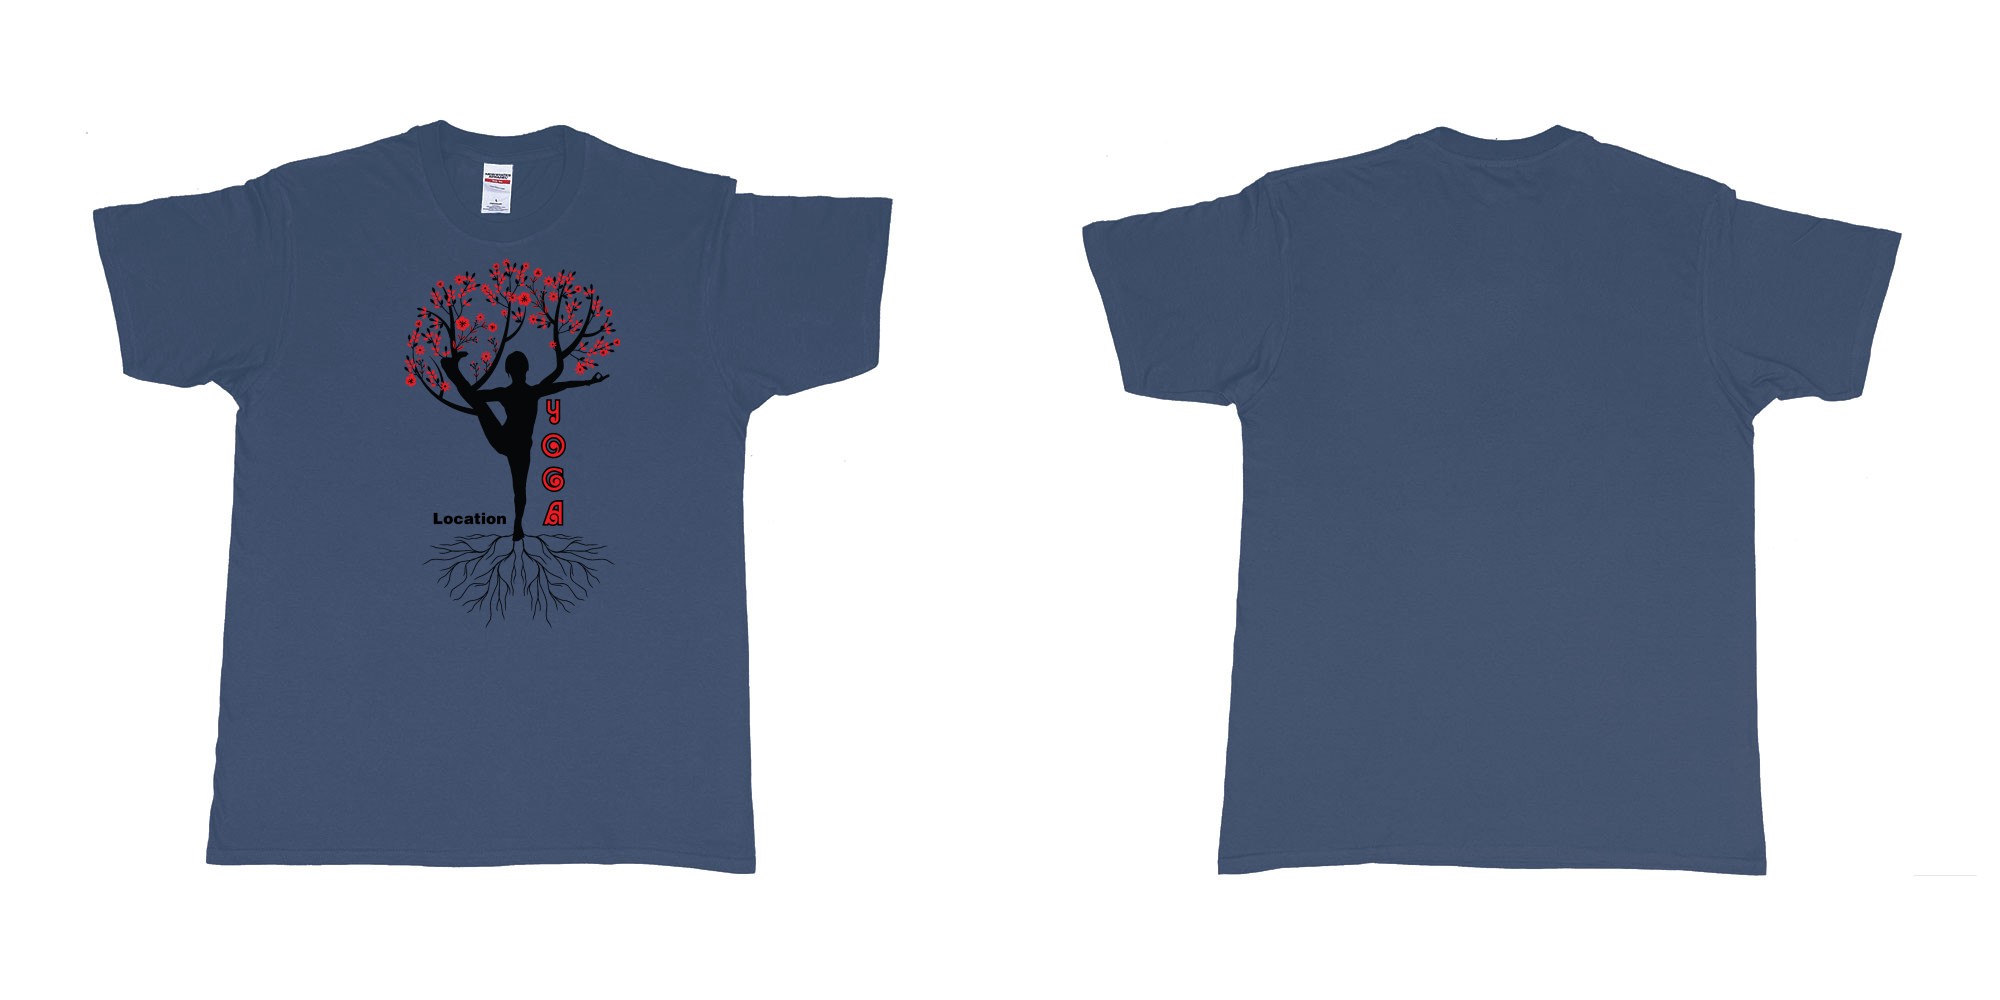 Custom tshirt design yoga tree of life is blooming own logo location design in fabric color navy choice your own text made in Bali by The Pirate Way